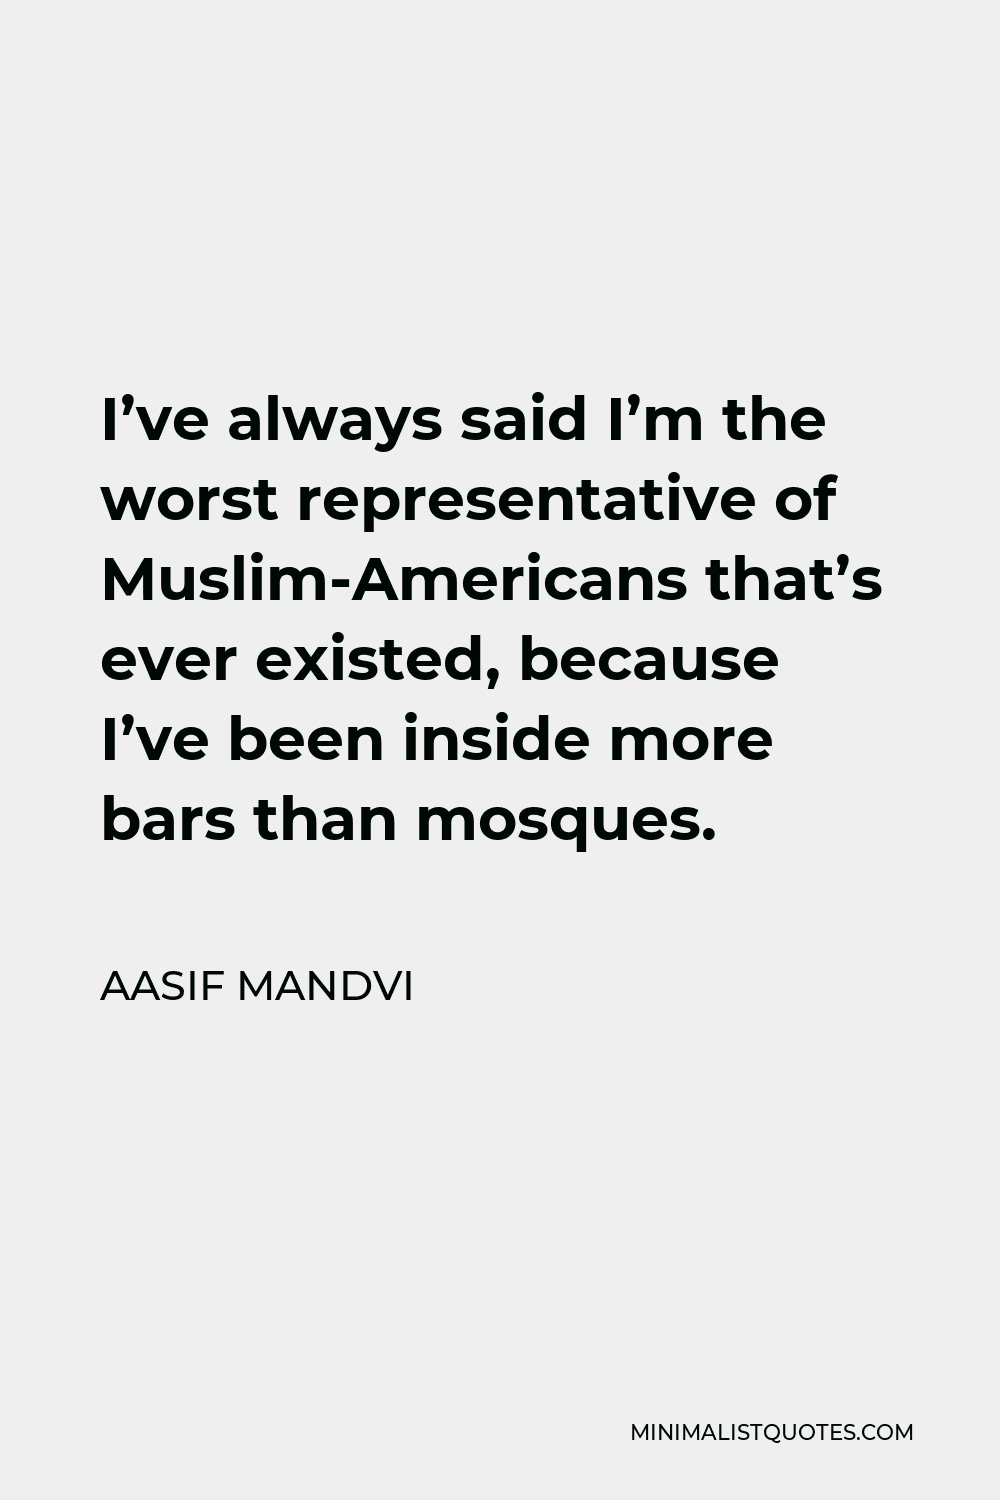 Aasif Mandvi Quote - I’ve always said I’m the worst representative of Muslim-Americans that’s ever existed, because I’ve been inside more bars than mosques.